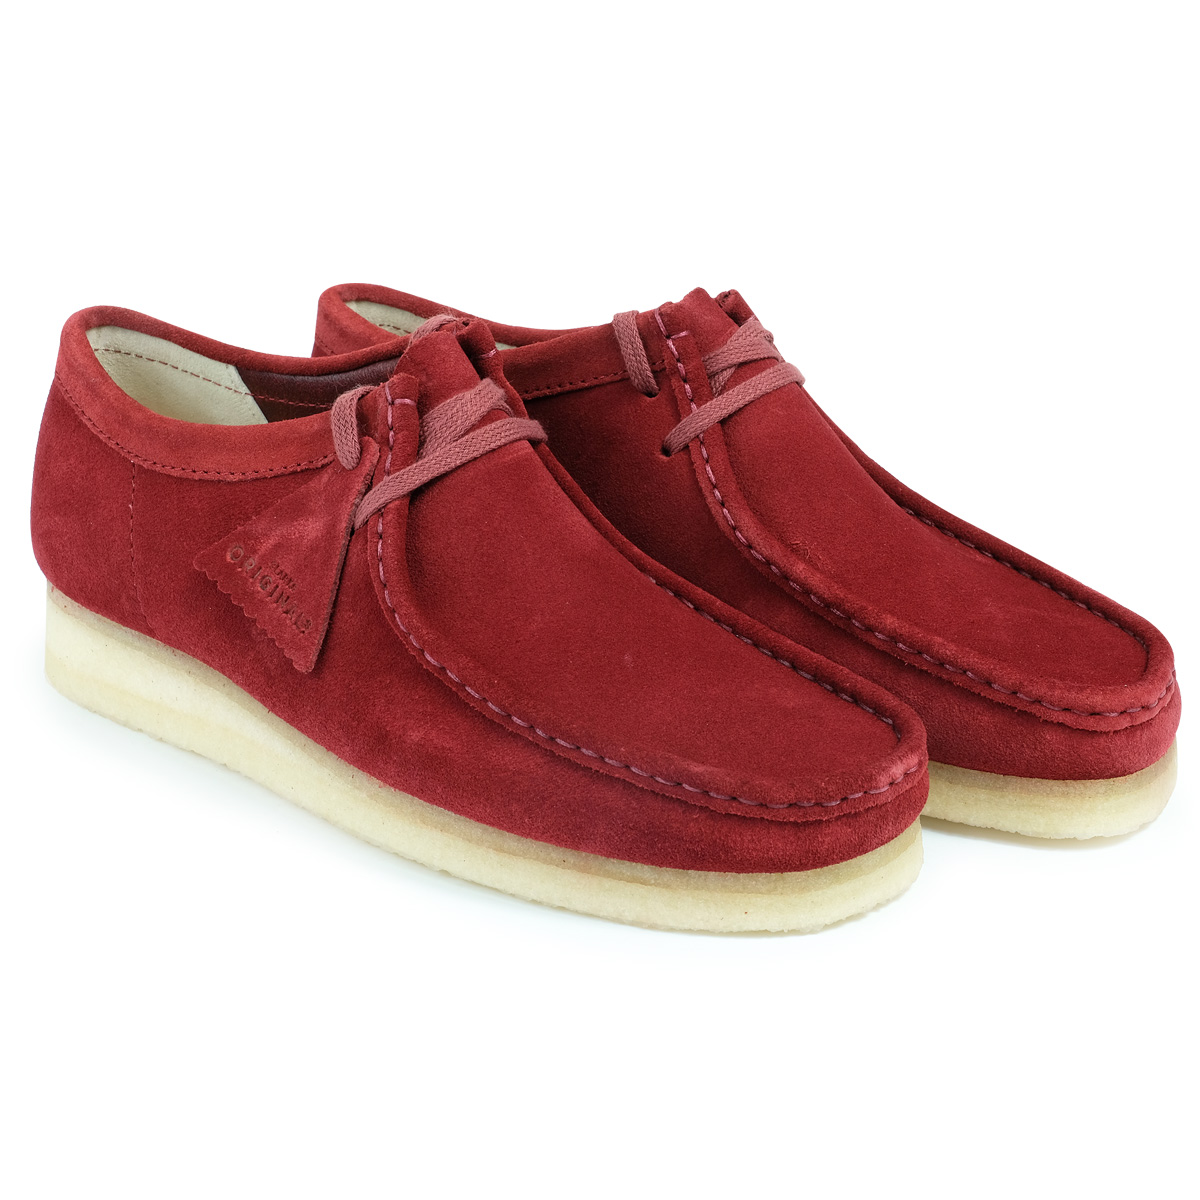 clarks red shoes